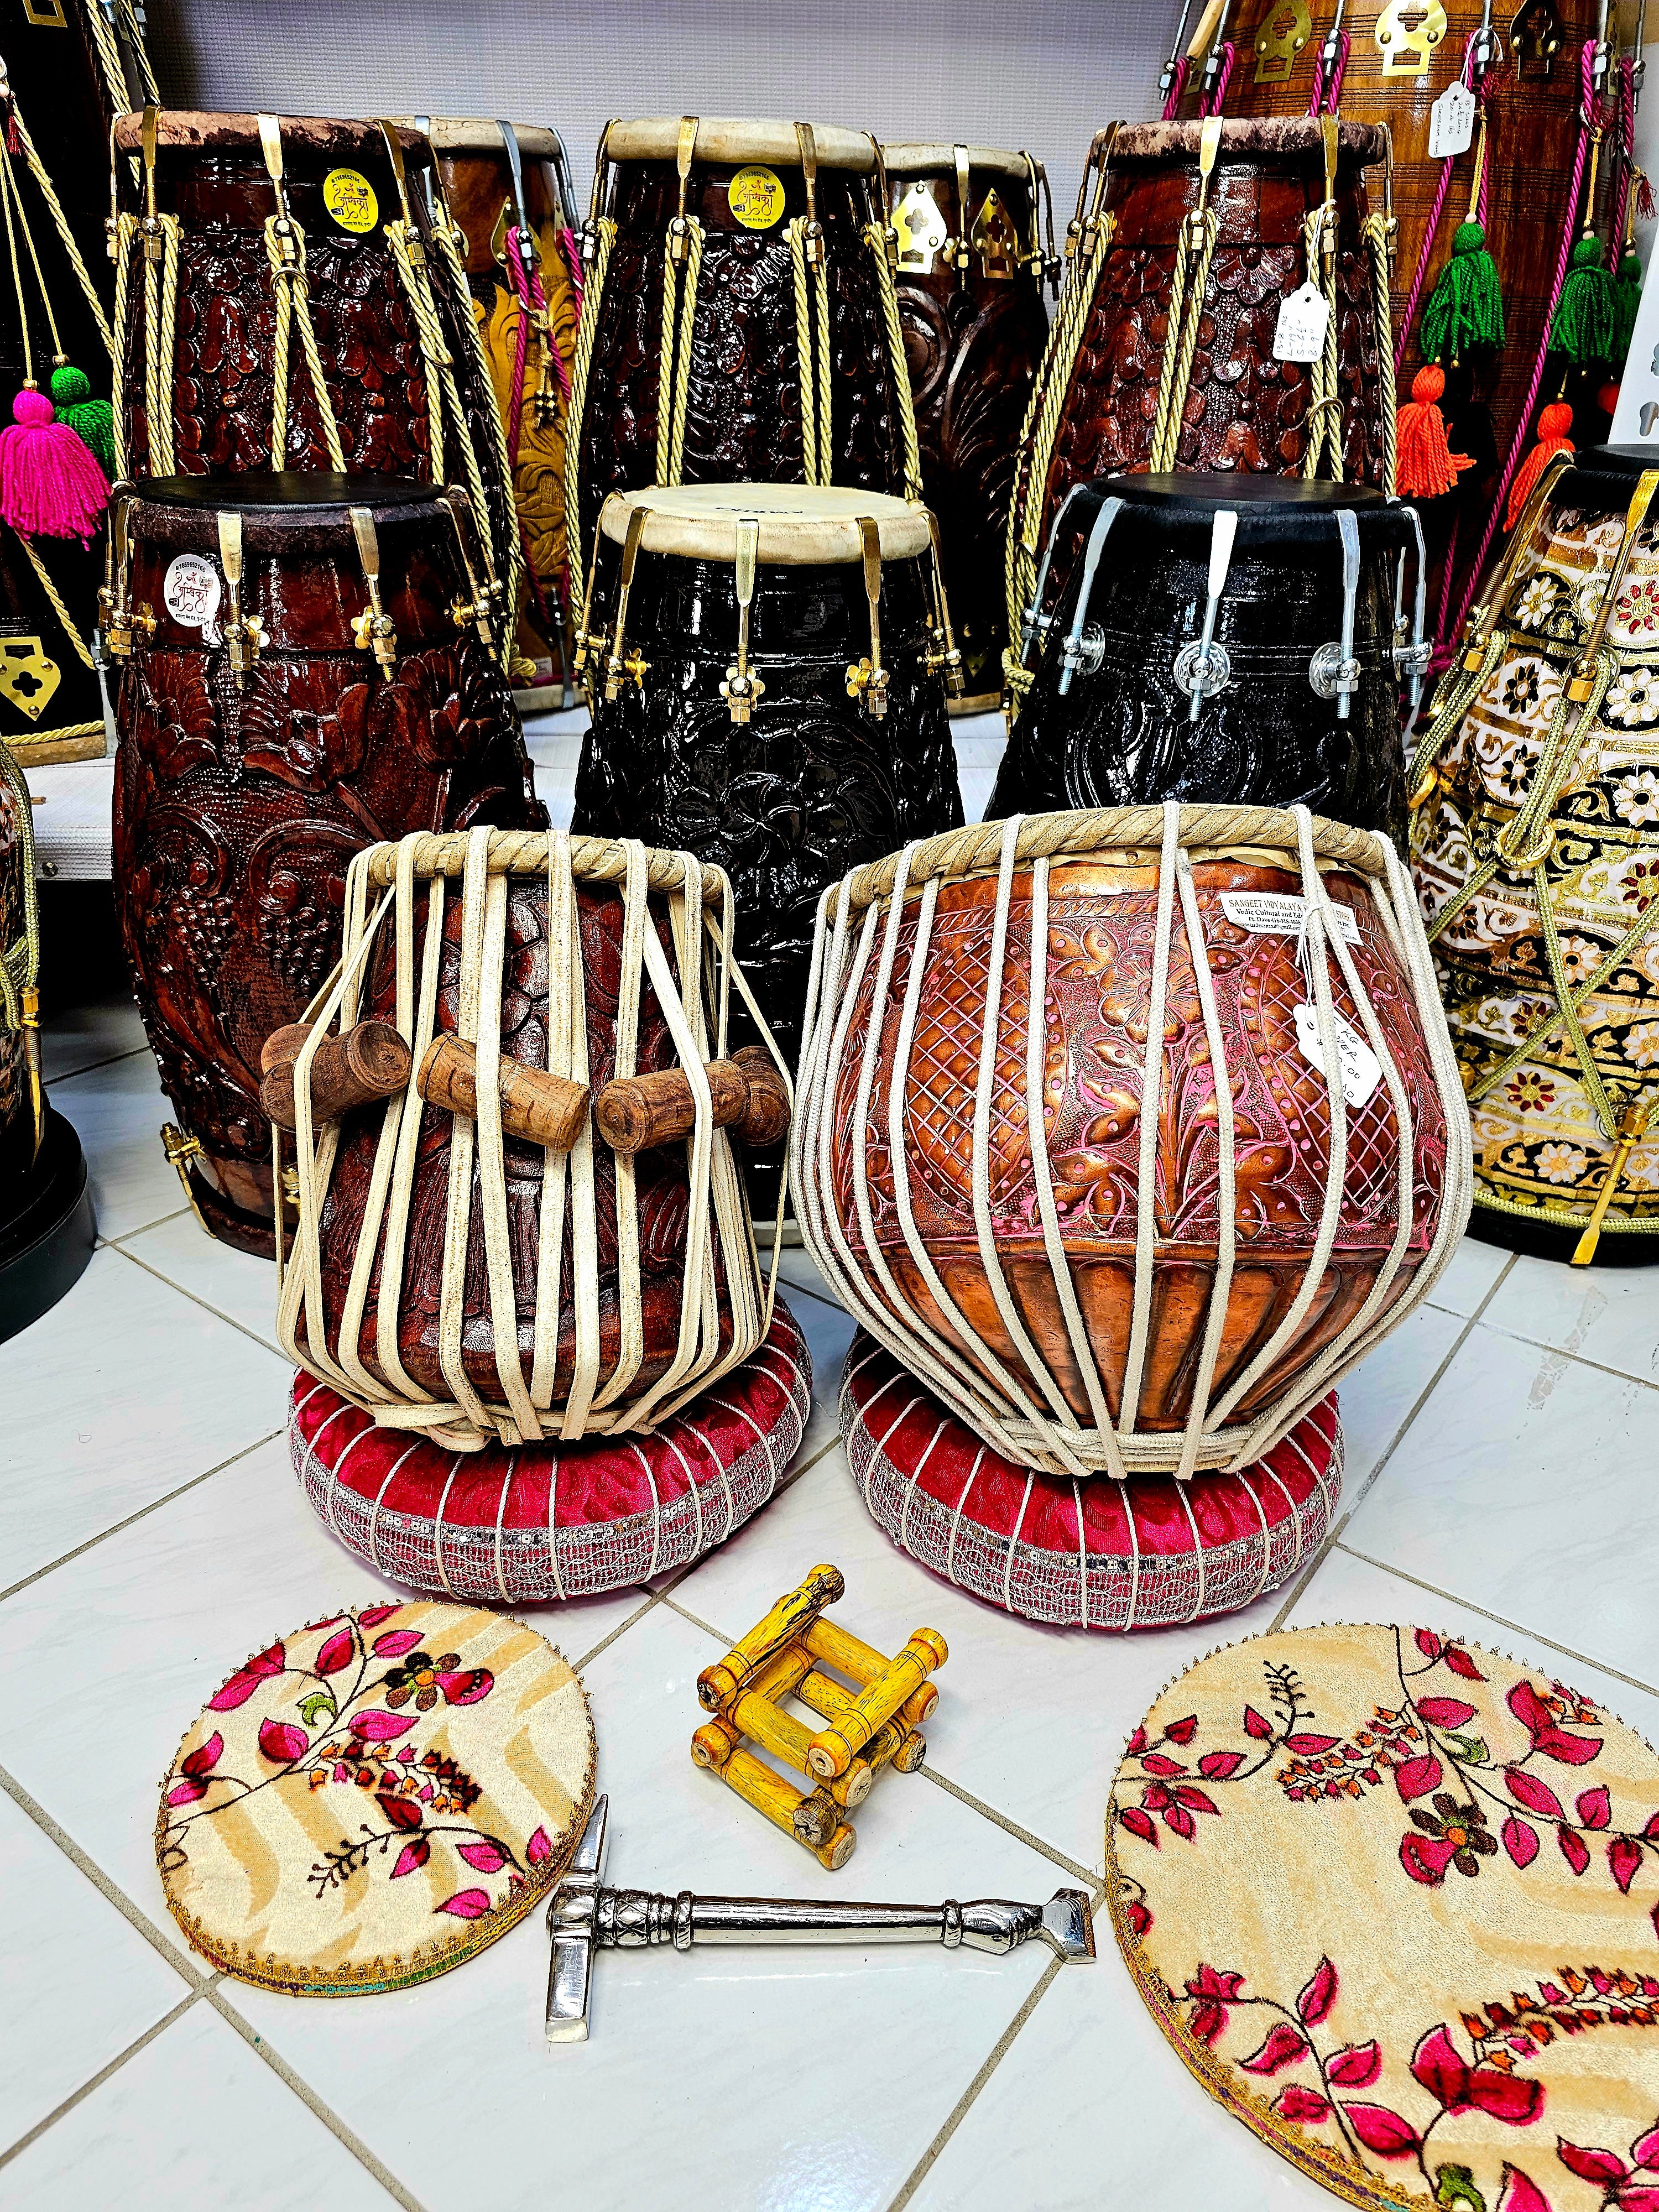 Enchanted Harmony Tabla Set - 5.75" C# Red Sheesham Engraved Dayan with Pink Outlines and 9.5" Engraved Bronze Copper 5.0kg Bayan with Pink Outlines